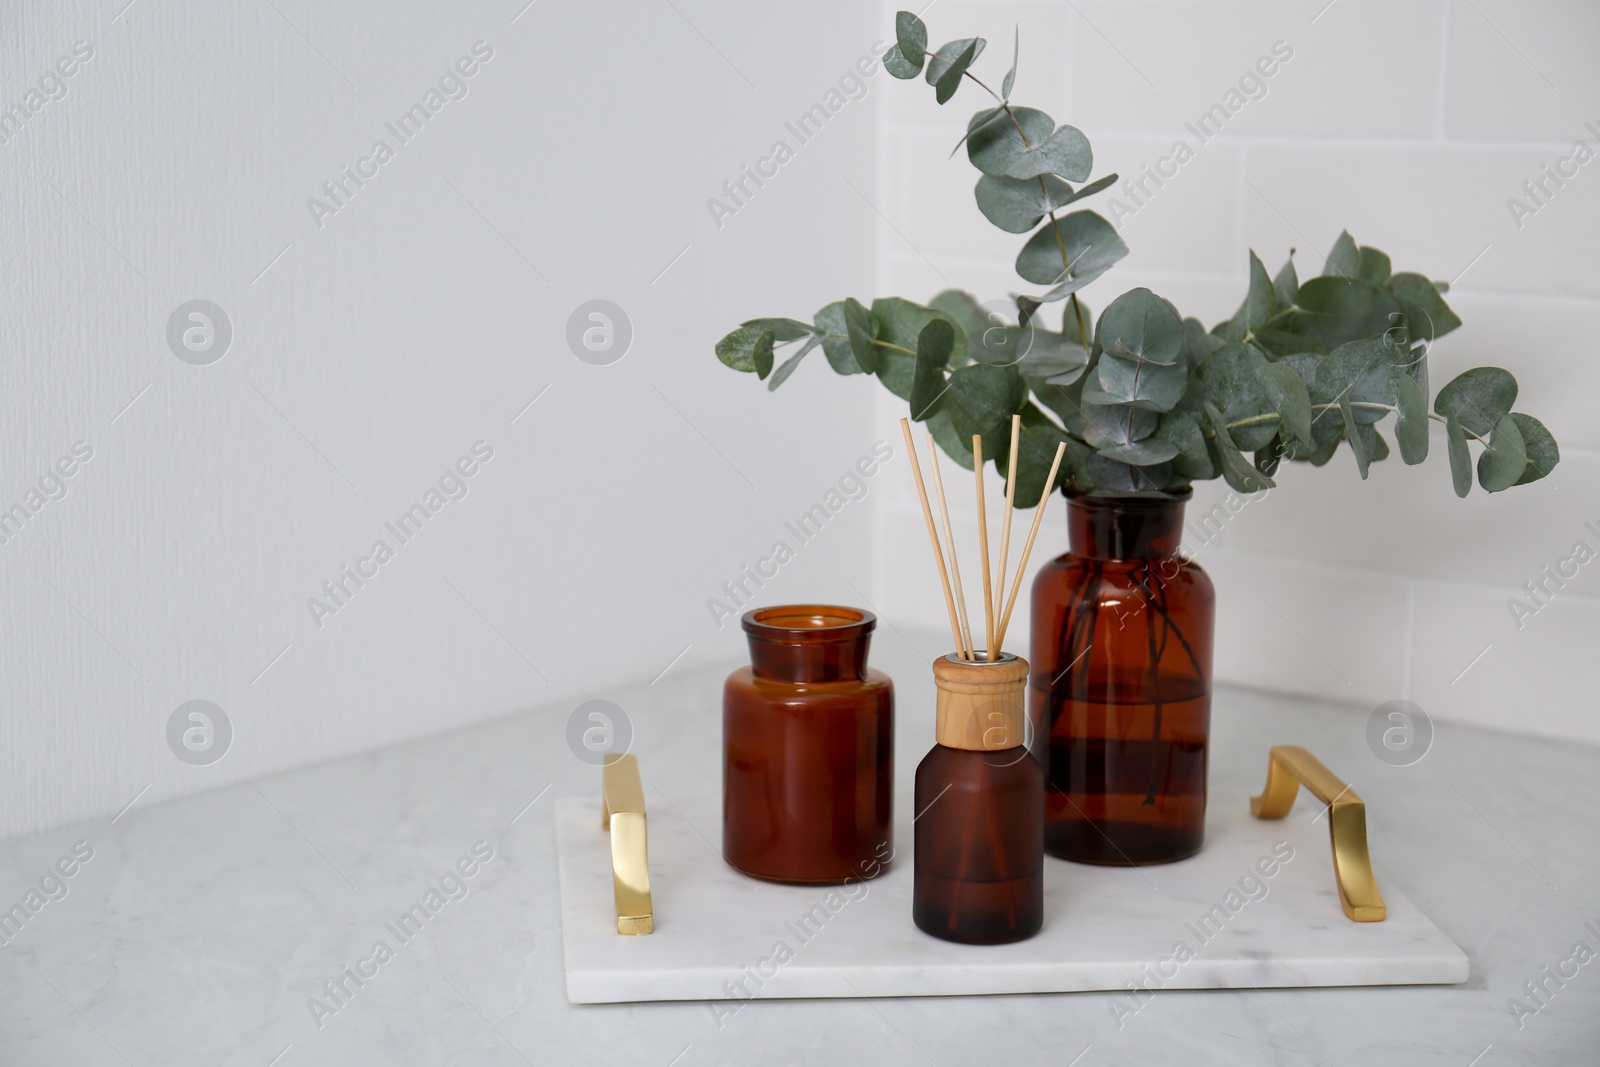 Photo of Eucalyptus branches, aromatic reed air freshener and candle on white table, space for text. Interior element